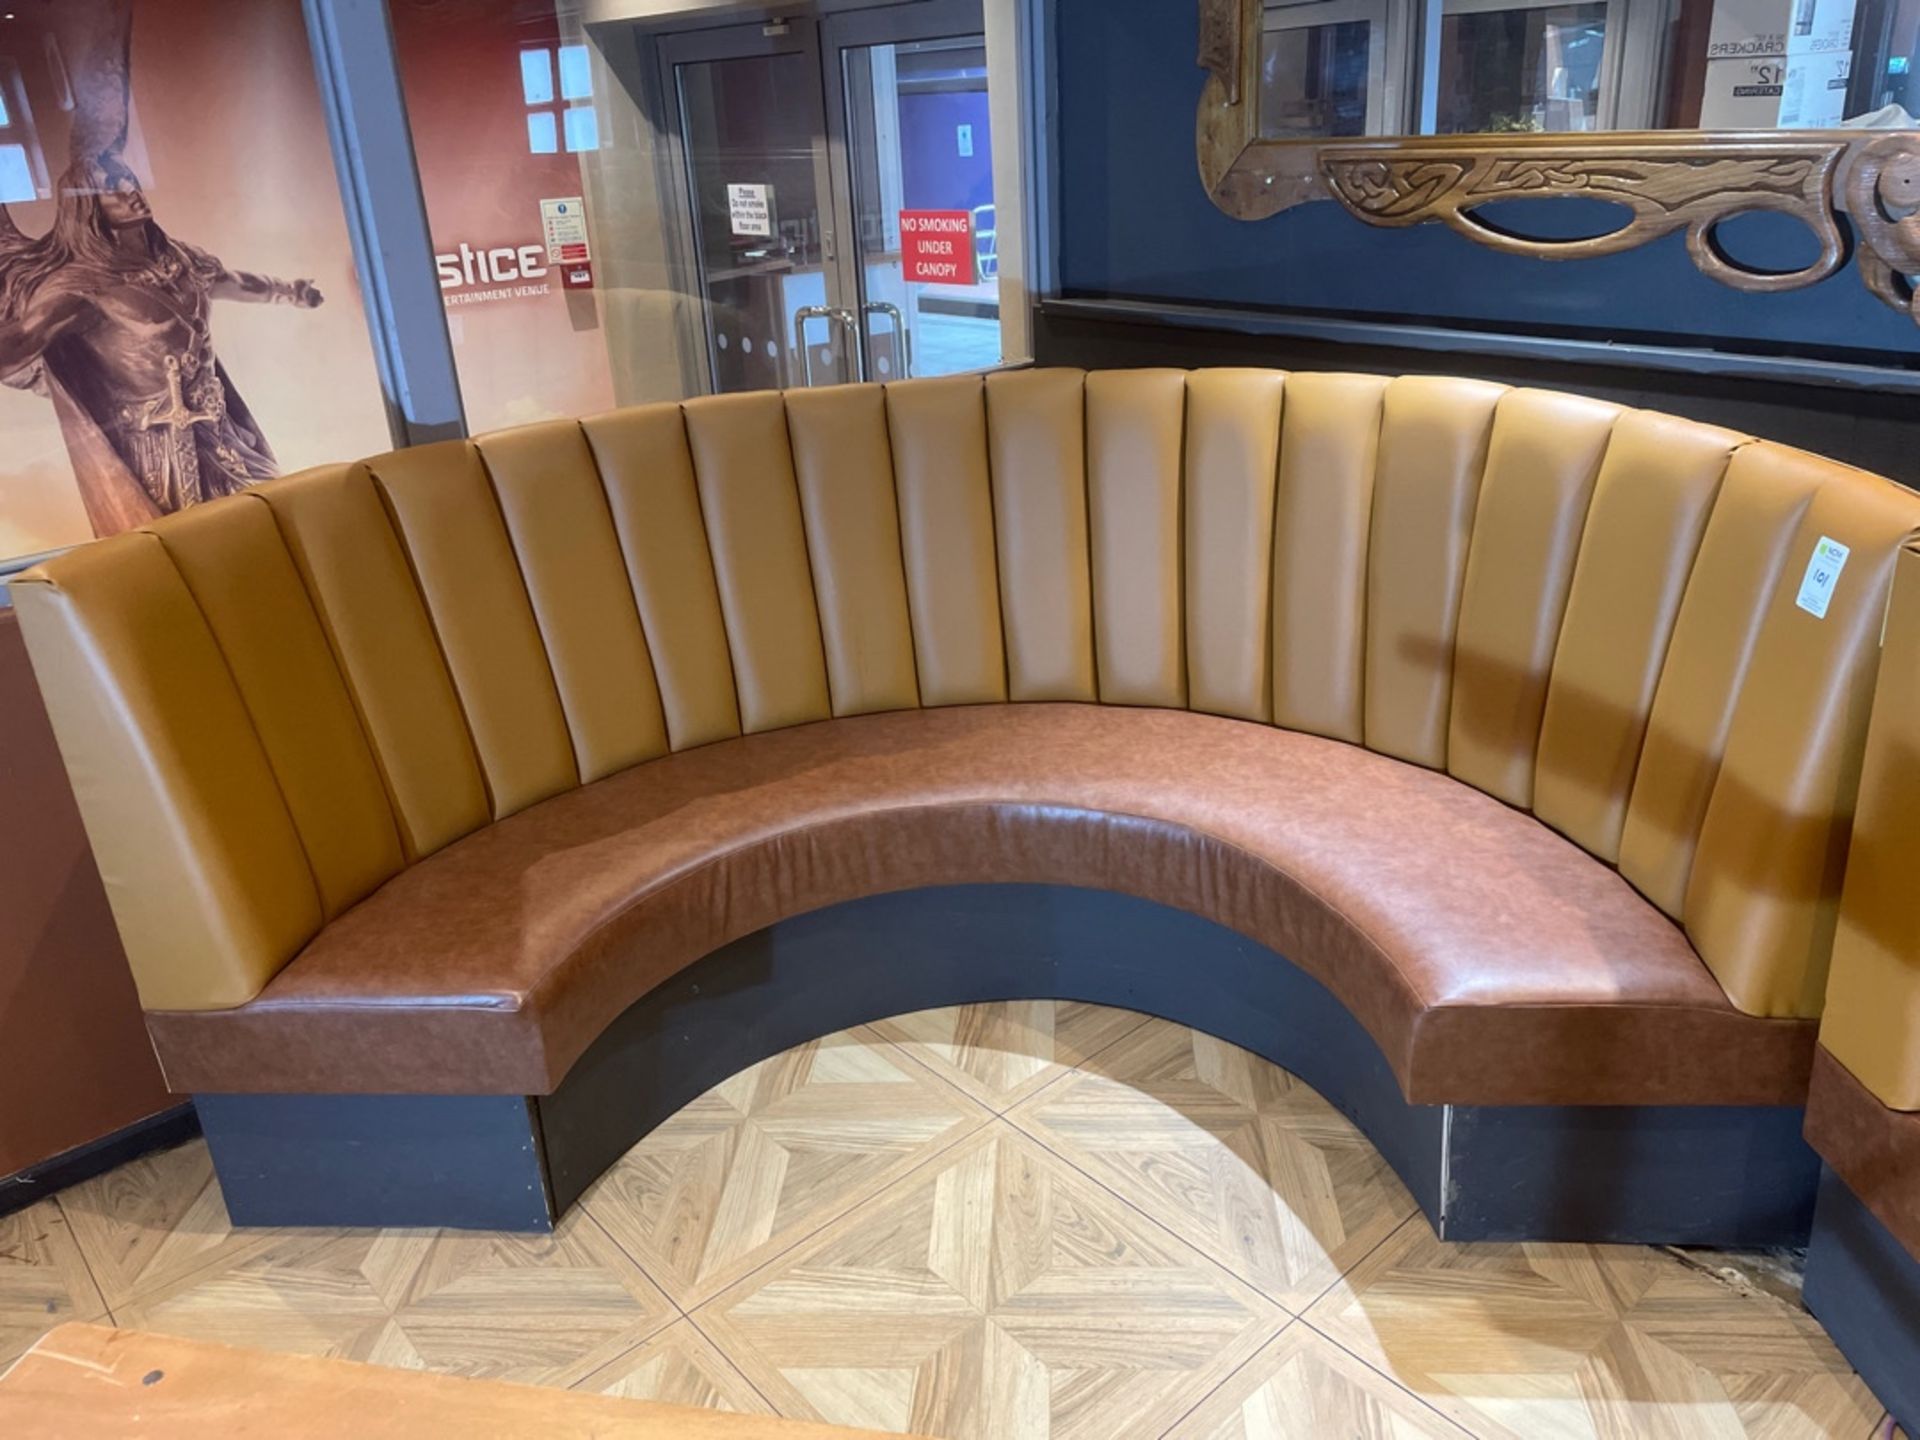 Booth Style Seating - Image 2 of 2